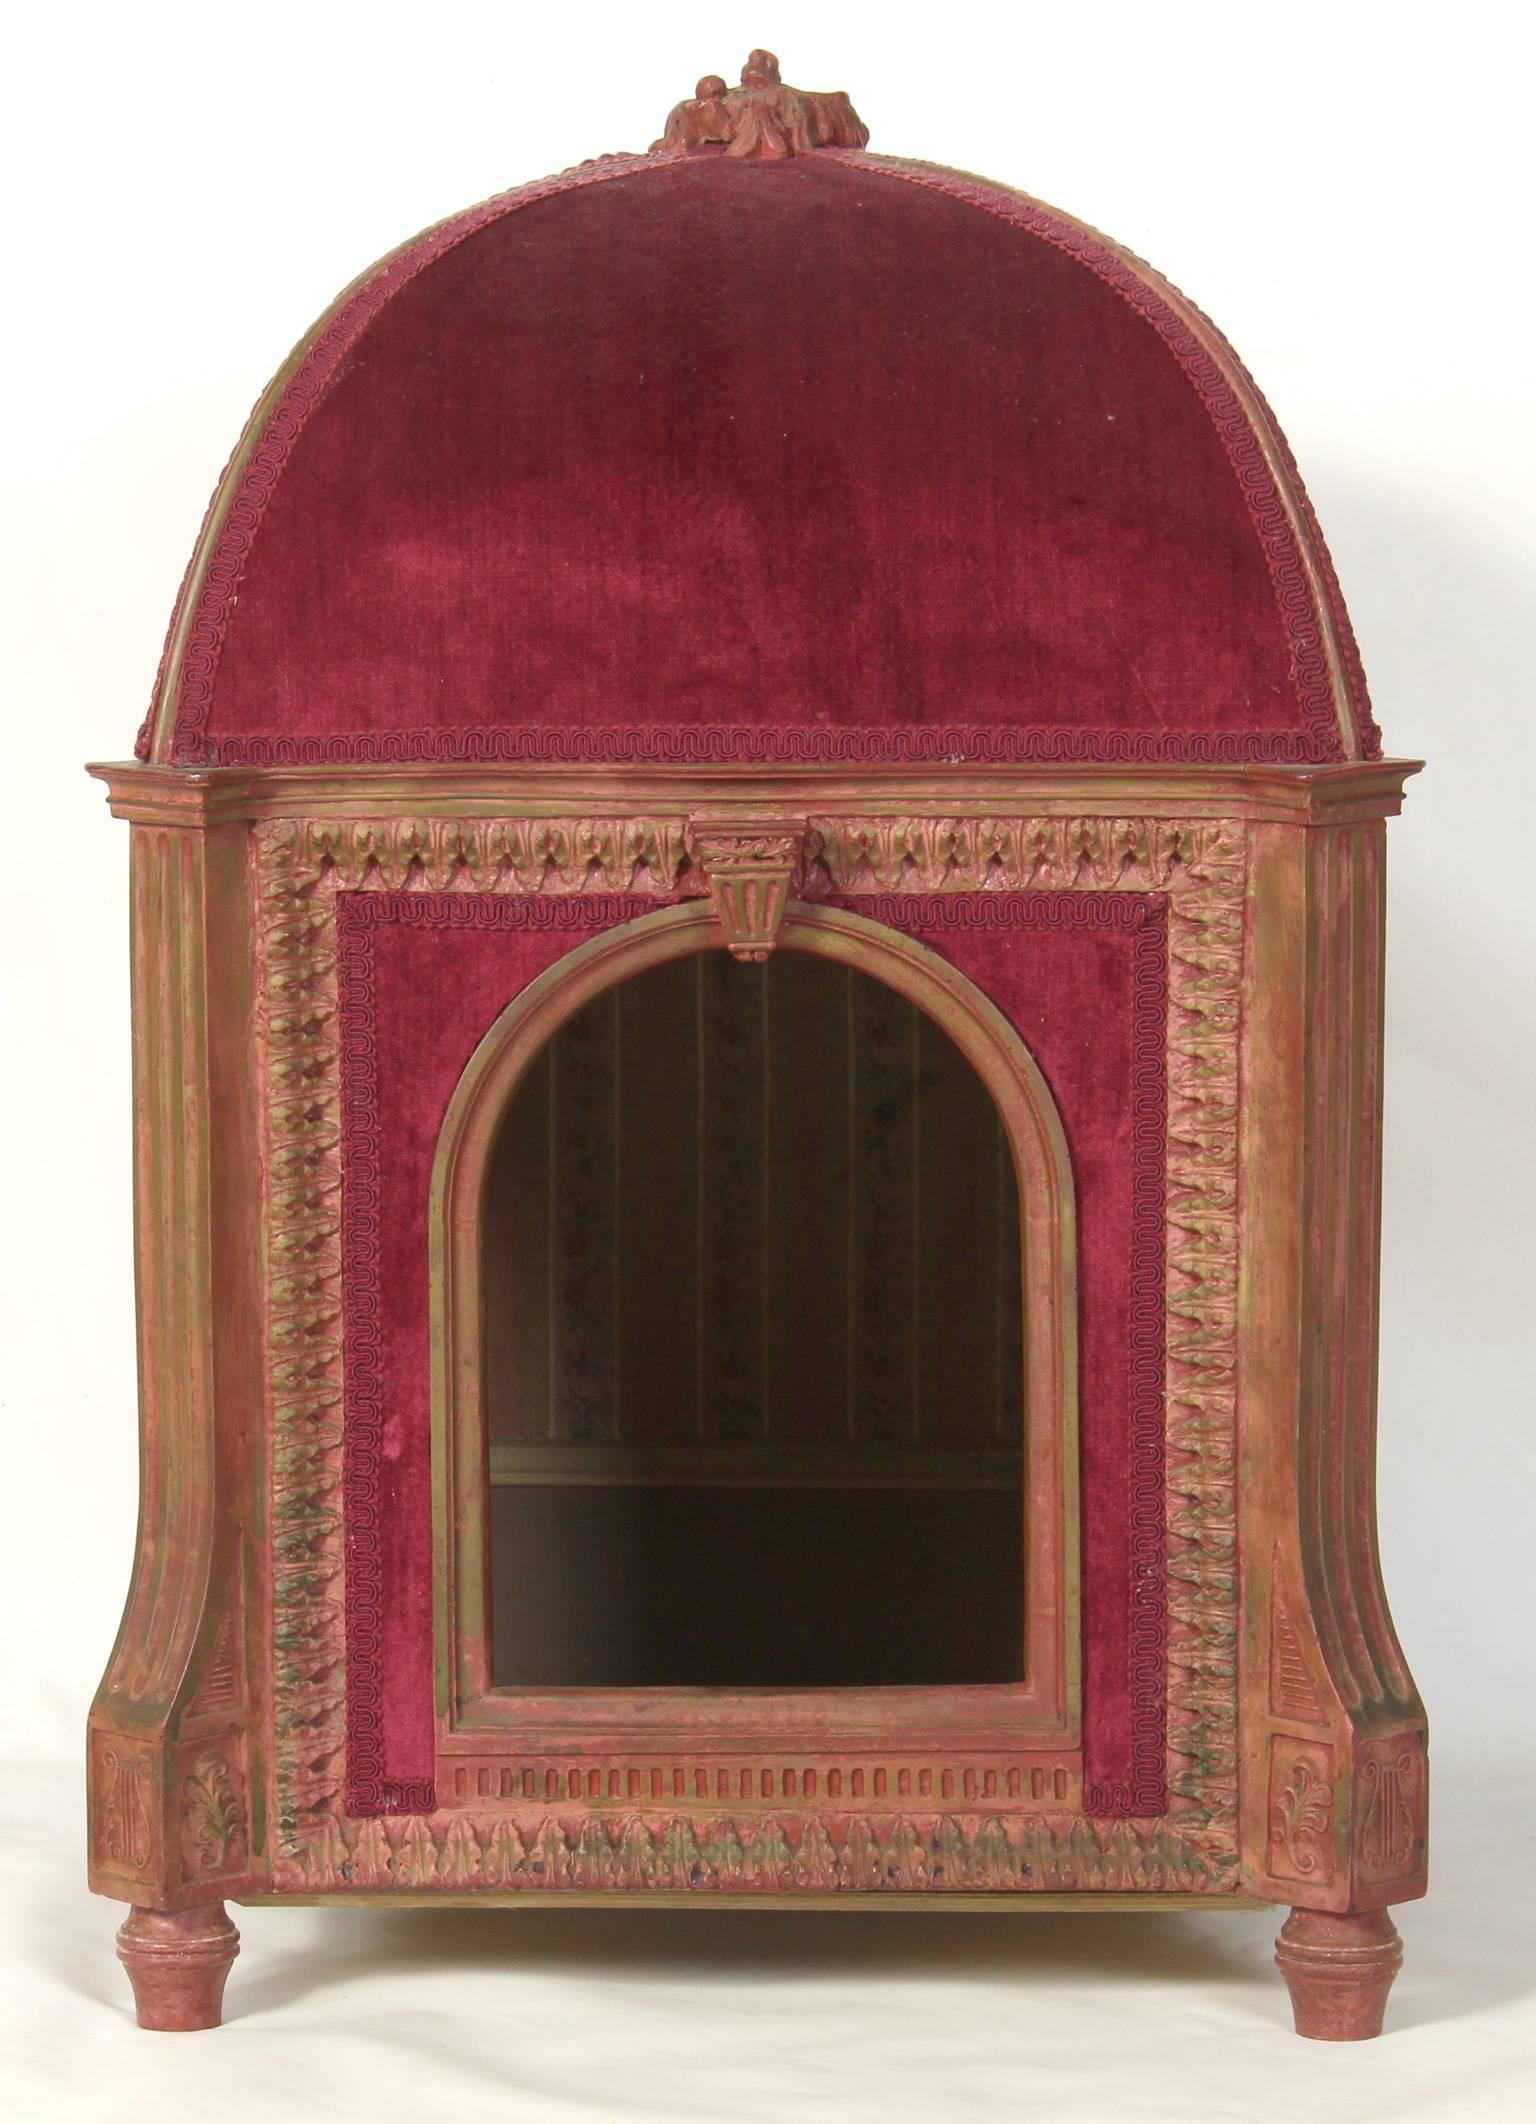 An elaborate French style upholstered cat kennel or bed made in England by Connoisseur Kennels, Surry, in the middle part of the 20th century.